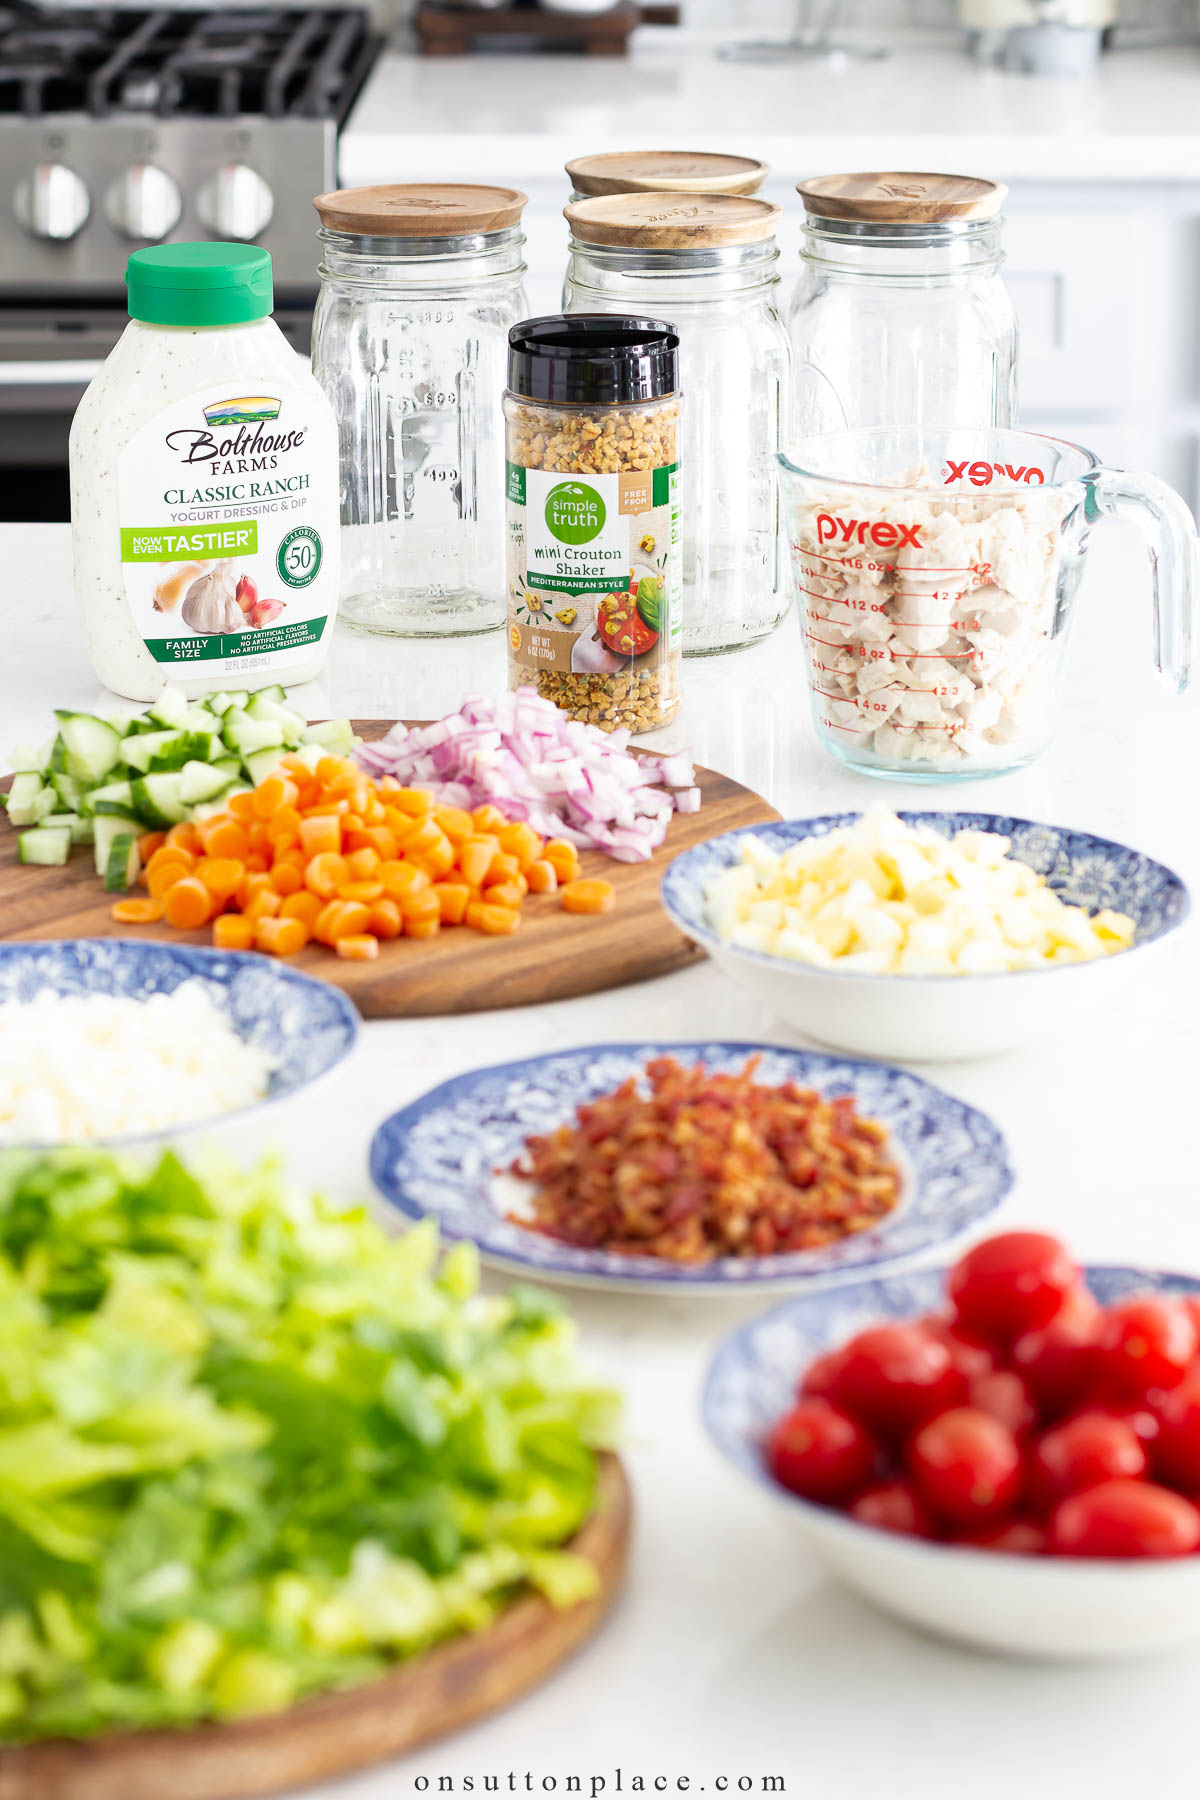 https://www.onsuttonplace.com/wp-content/uploads/2023/04/ingredients-for-meal-prep-salads.jpg